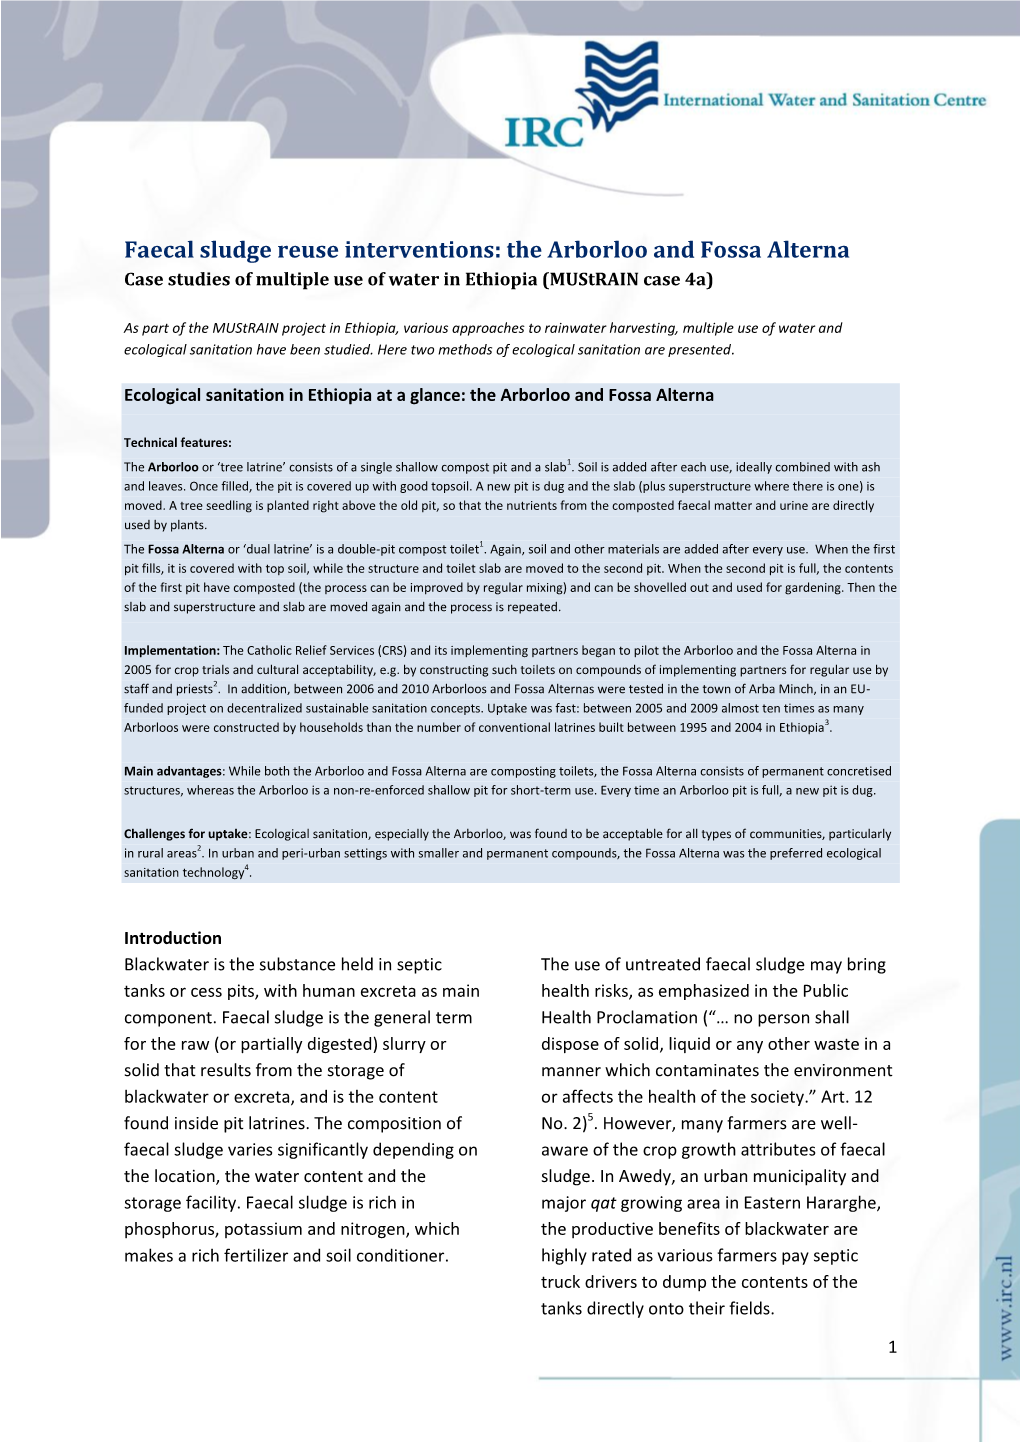 Faecal Sludge Reuse Interventions: the Arborloo and Fossa Alterna Case Studies of Multiple Use of Water in Ethiopia (Mustrain Case 4A)